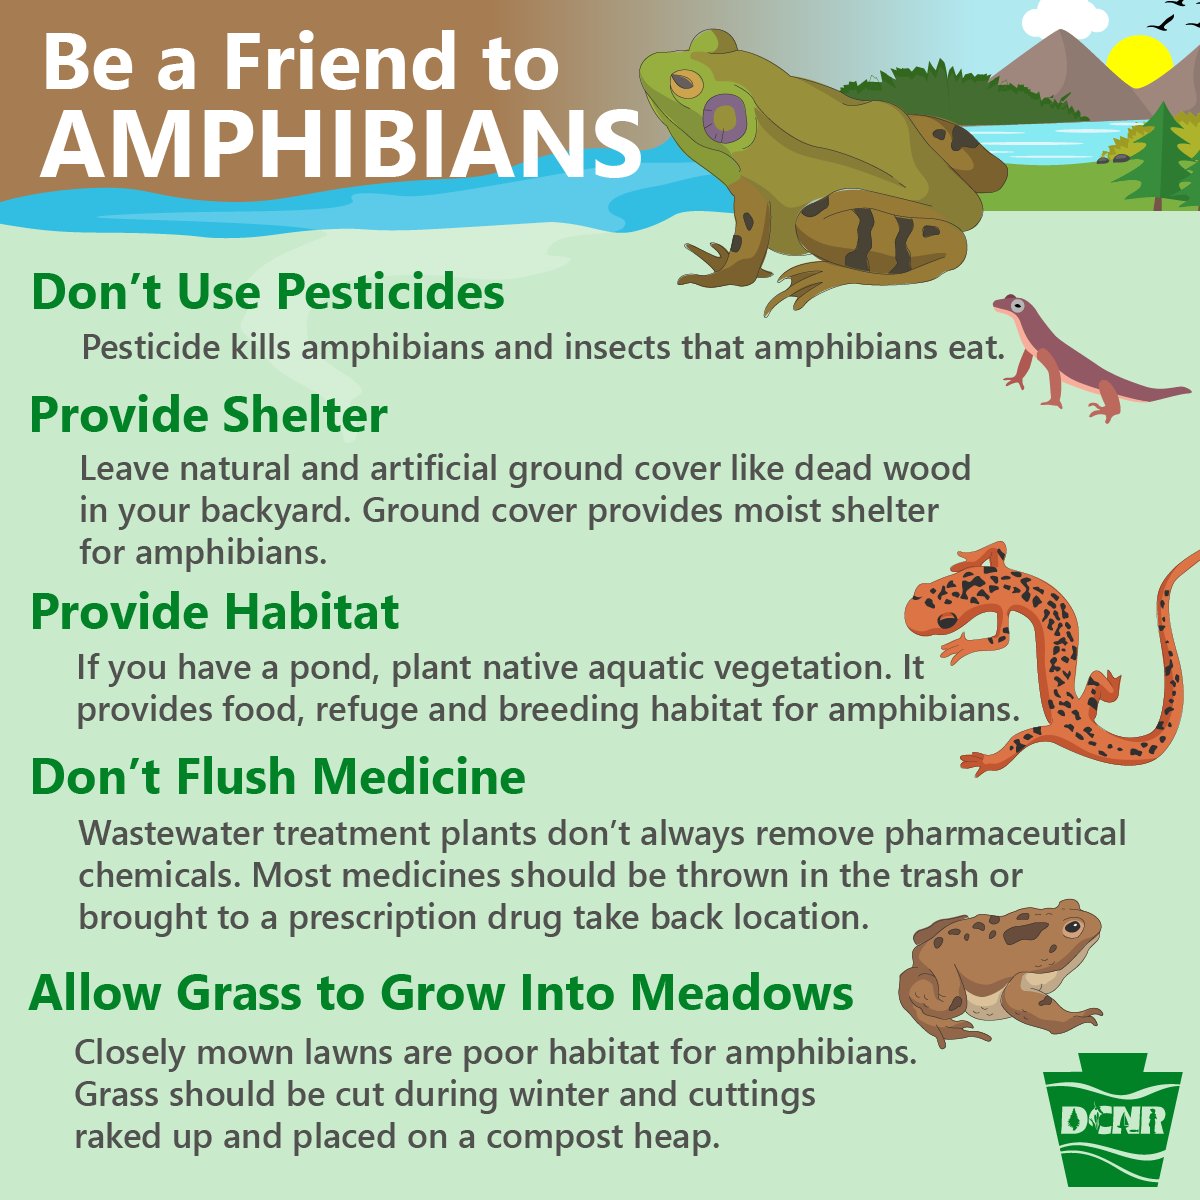 There are 30+ species of amphibians in PA. They eat insect pests and are a central part of many food webs. They are vulnerable to drought and toxic substances, so they are great indicators of ecosystem health. Here are some tips to be a friend to amphibians ⤵️ #AmphibianWeek